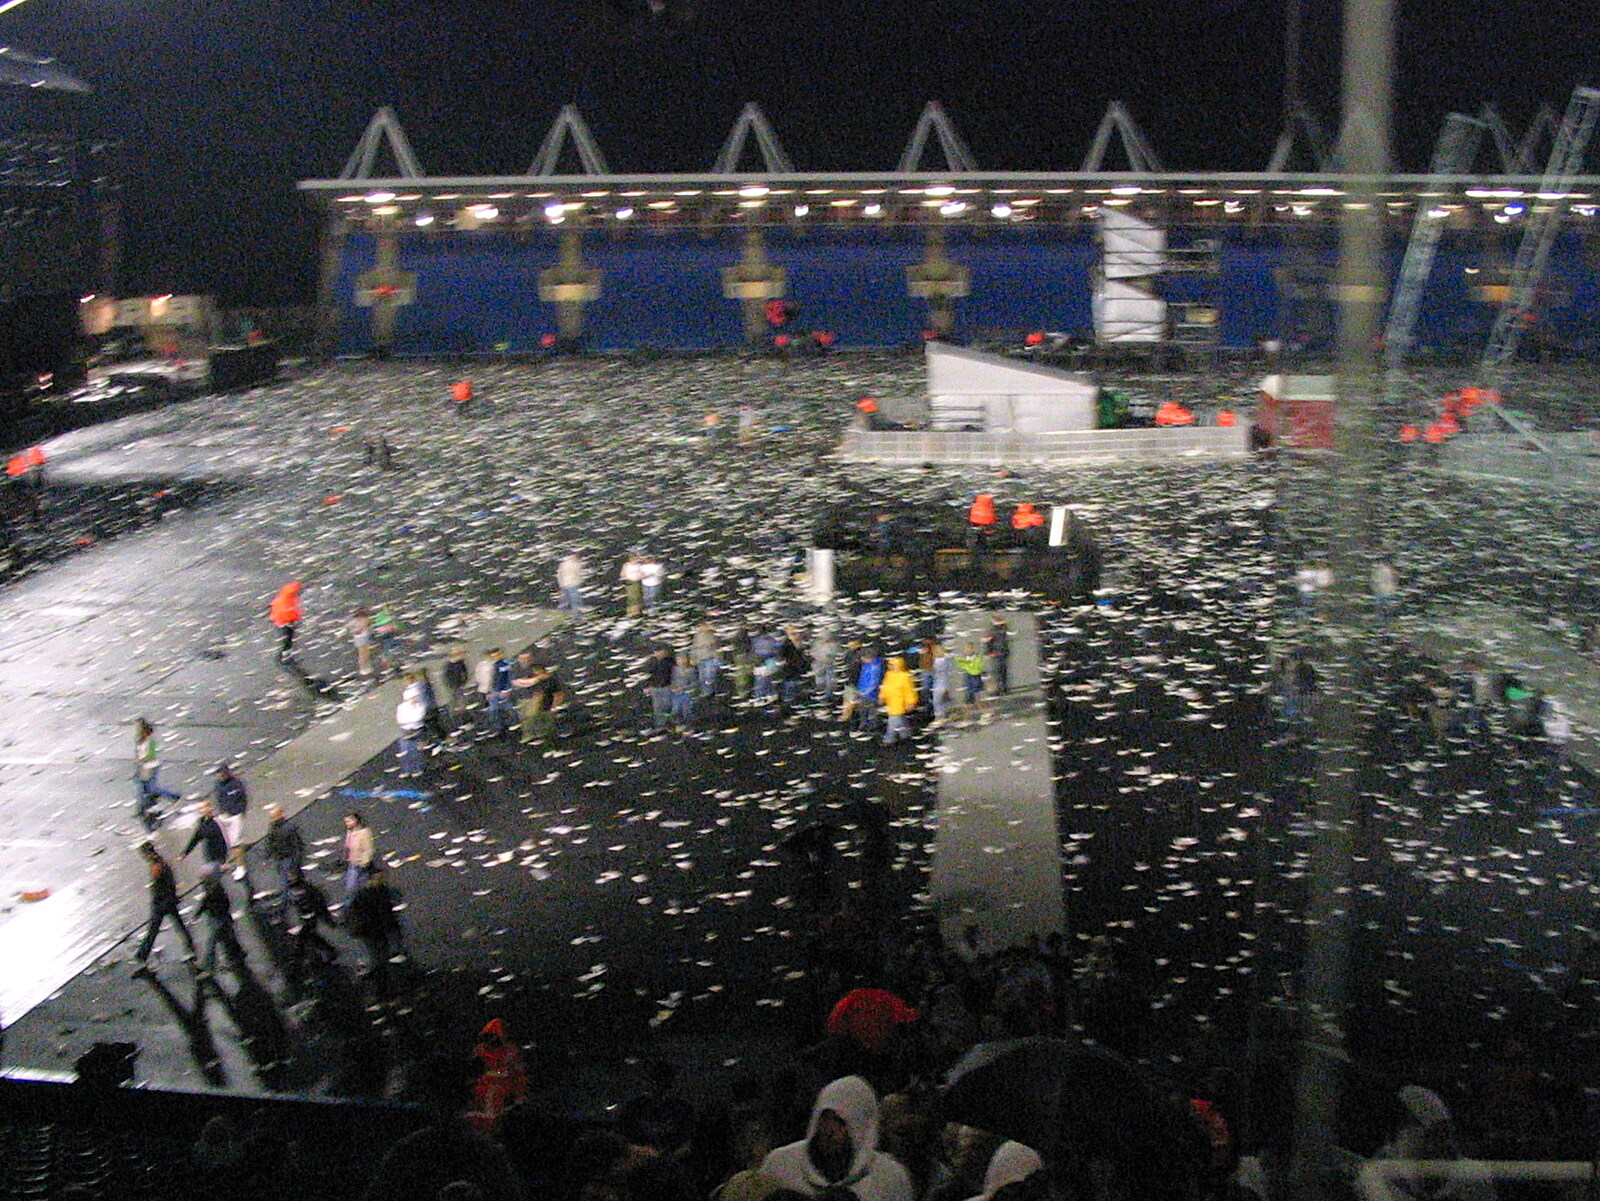 The rain dumps on the crowd after the gig finishes from Coldplay Live at Crystal Palace, Diss Publishing and Molluscs, Diss and London - 28th June 2005